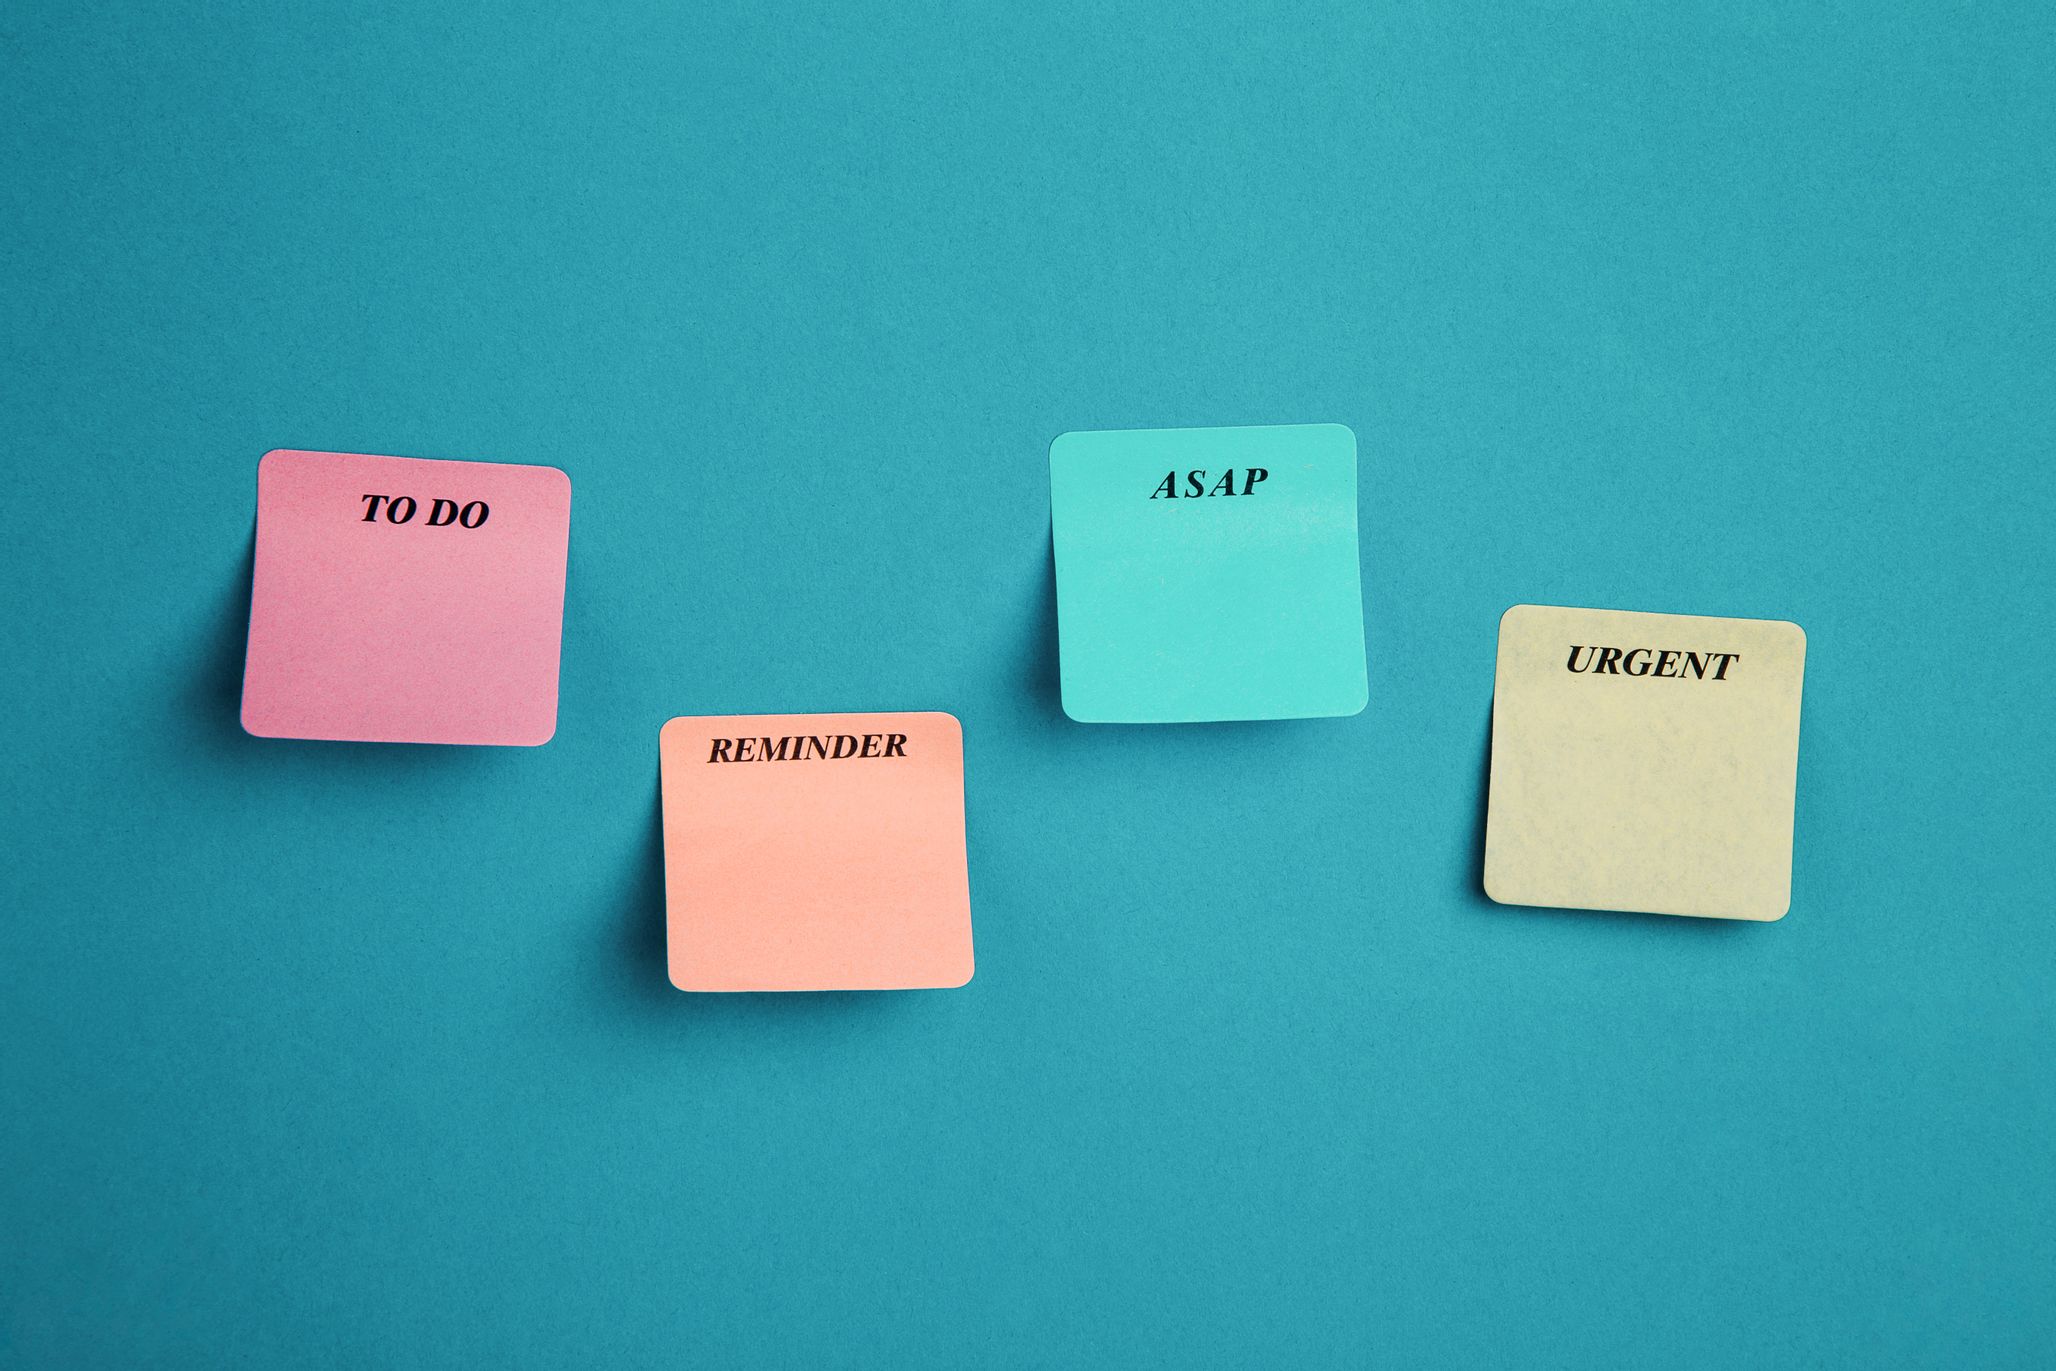 "To do" "reminder" and "ASAP" colored Post-It notes against a blue background